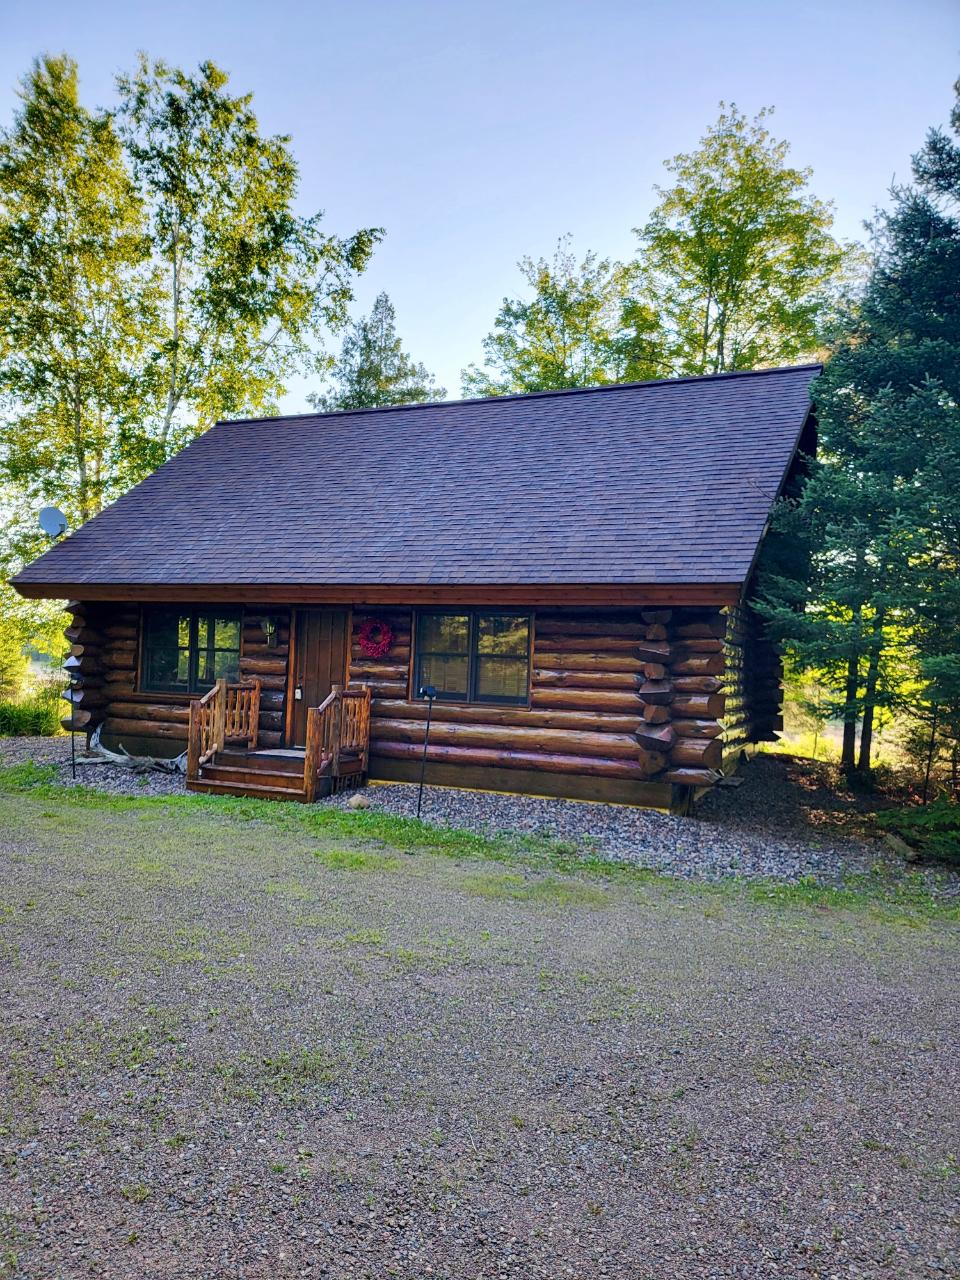 Charming year-round log cabin on the Flambeau River! This 2BR, 1BA home is situated on just over an acre & boasts a large level yard & 300’ of river frontage. Walk into the open concept living area with a new pellet stove for extra comfort in the cooler months. A new AC unit was just installed for use on these hot summer days. There is one full bedroom and bathroom on the main level and a large loft area above providing extra space for family and guests to enjoy your lovely river home. This home has a full basement, partially finished with tons of opportunities for extra recreation/gathering space, an office, etc. There are 2 add’l storage sheds for keeping toys. This place is an outdoor enthusiast’s dream! Float down river or relax & throw a line from the dock. Over 15,000 acres of water, great fishing and tons of fun. Enjoy the secluded feeling of being within nature on the river, yet a short drive to downtown Park Falls. See this place today and start making many memories to come!